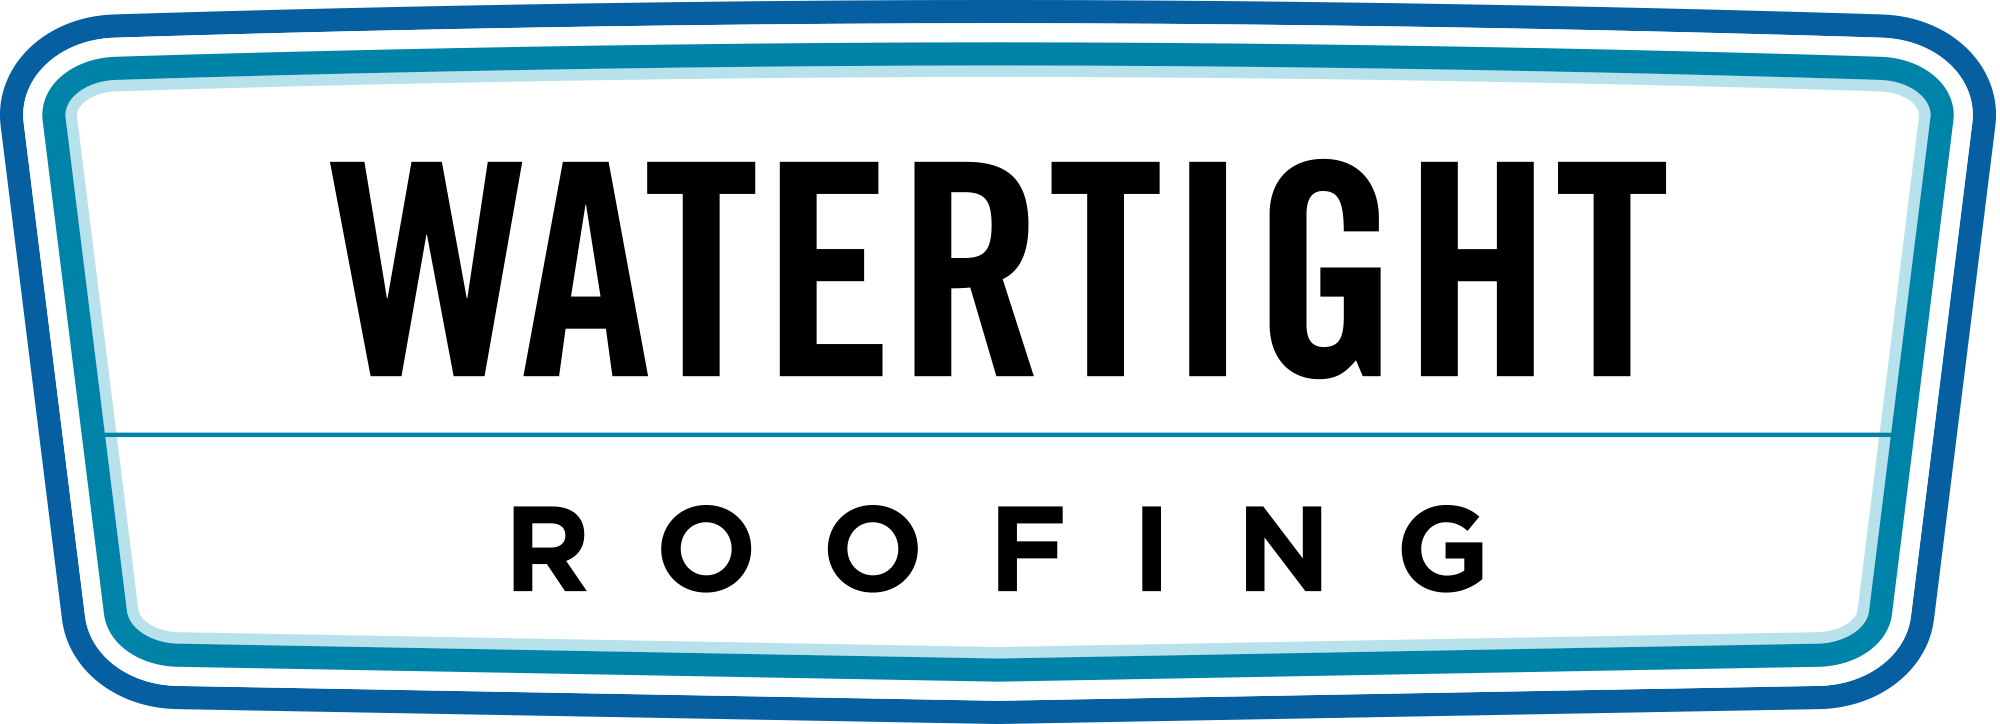 Watertight Roofing Commercial